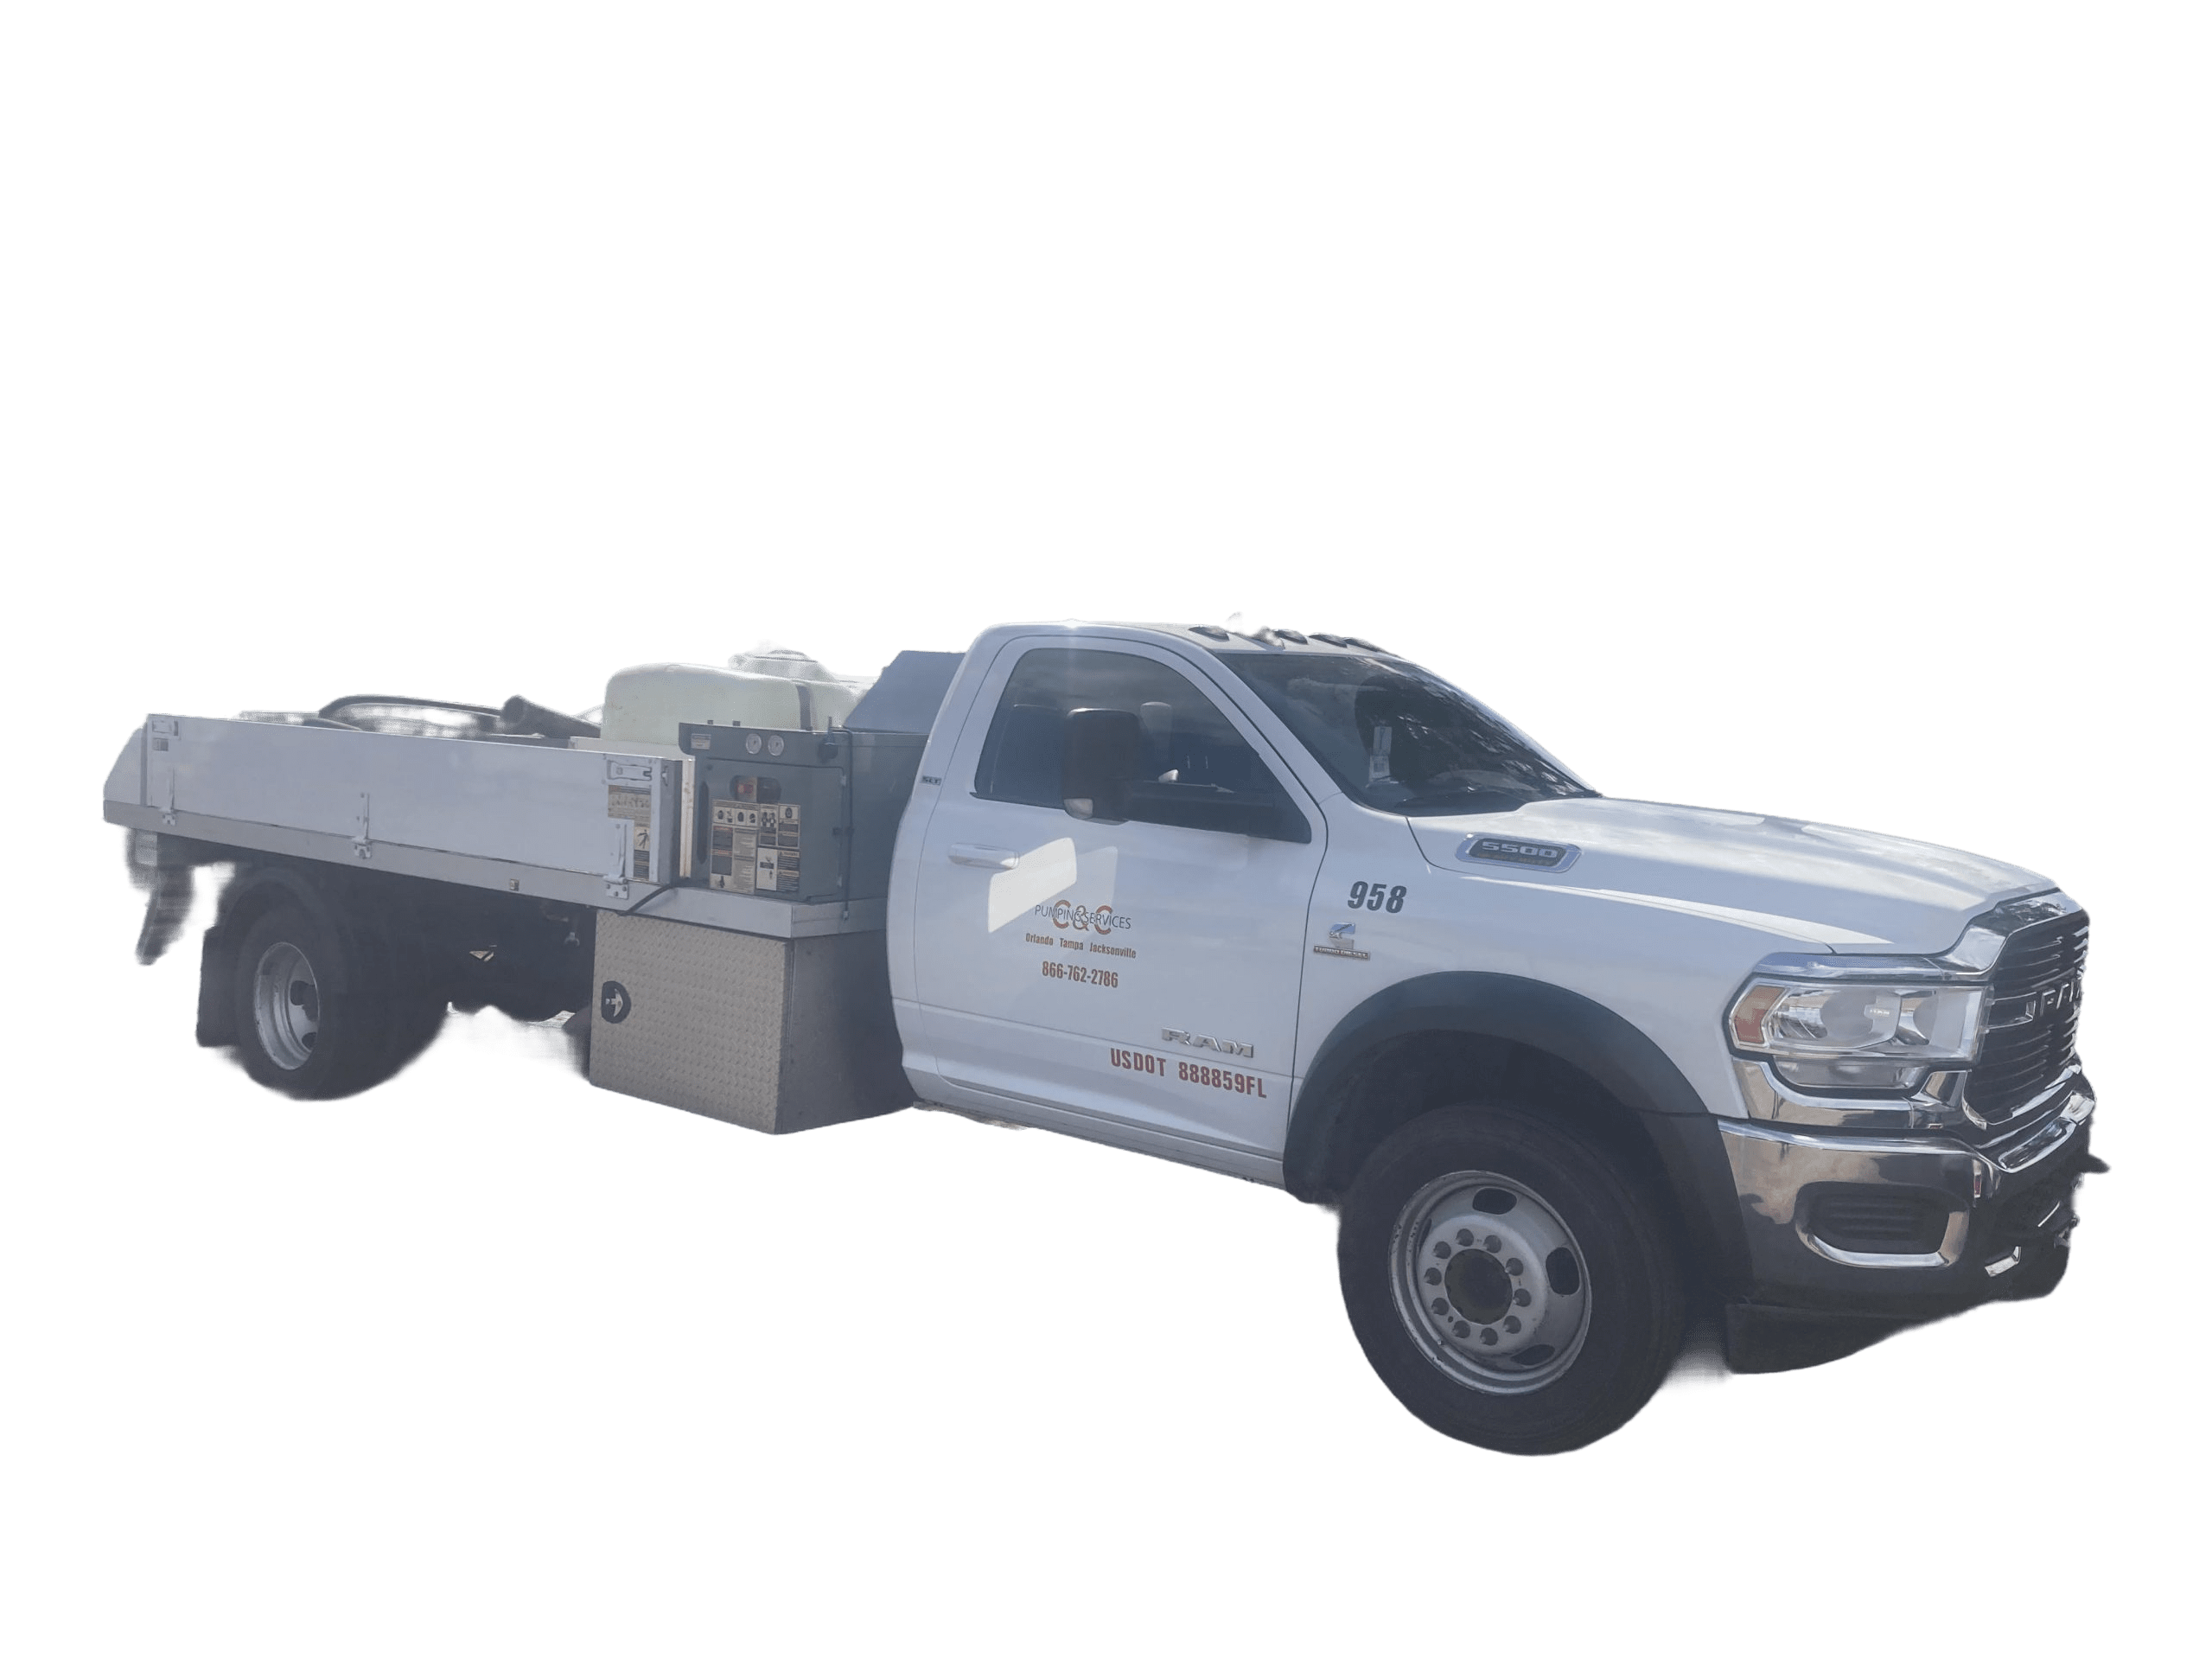 CTY 100 Trailer Pump, provided by C&C Concrete Pumping Services Inc.